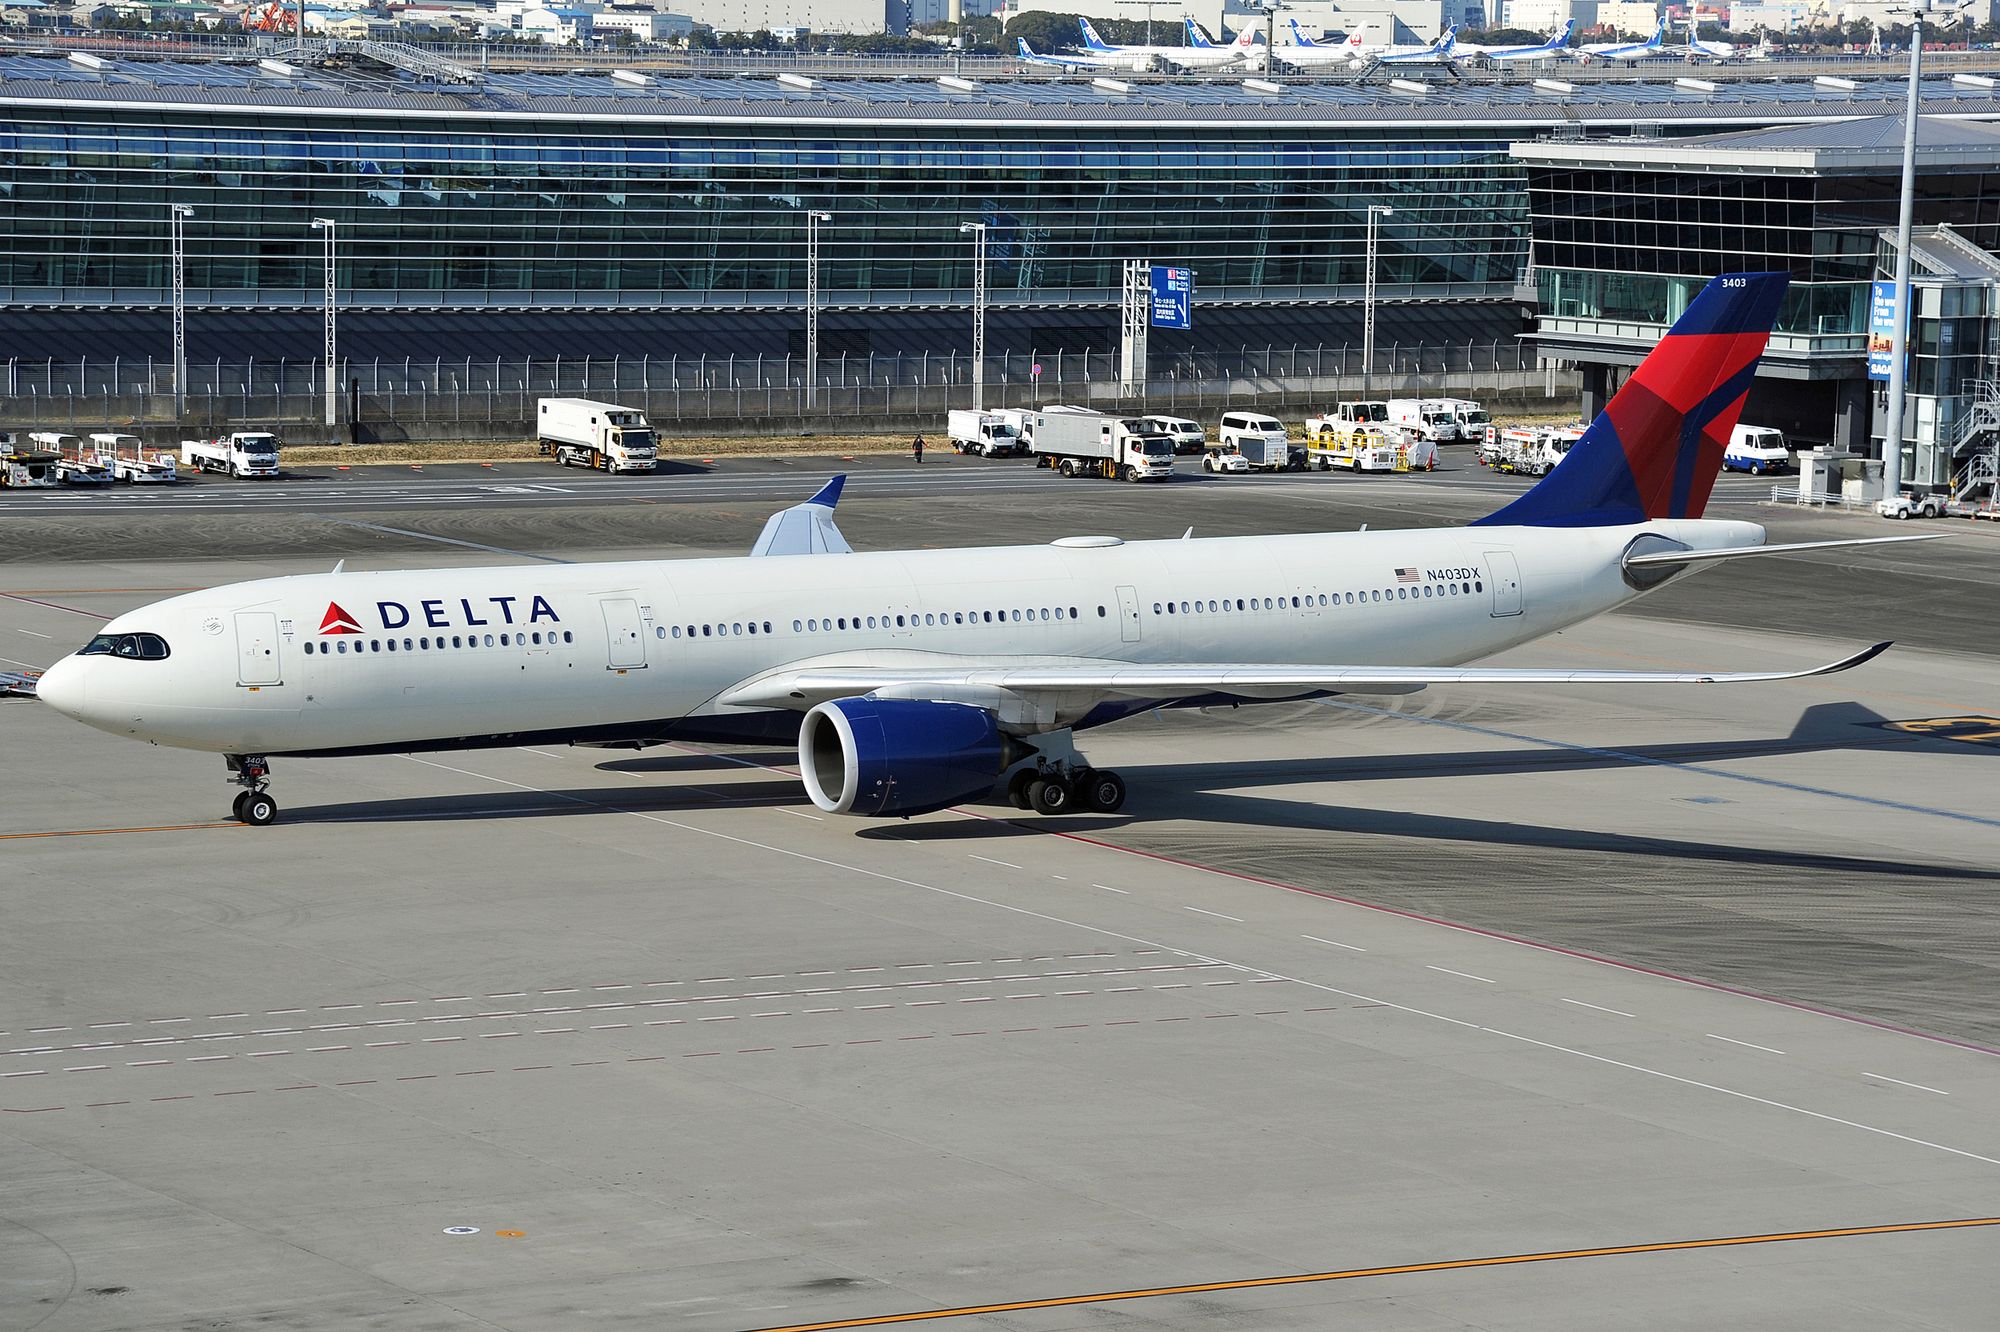                      Delta Forced To Relaunch Honolulu and Portland to Haneda or Lose Their Slots                             
                     